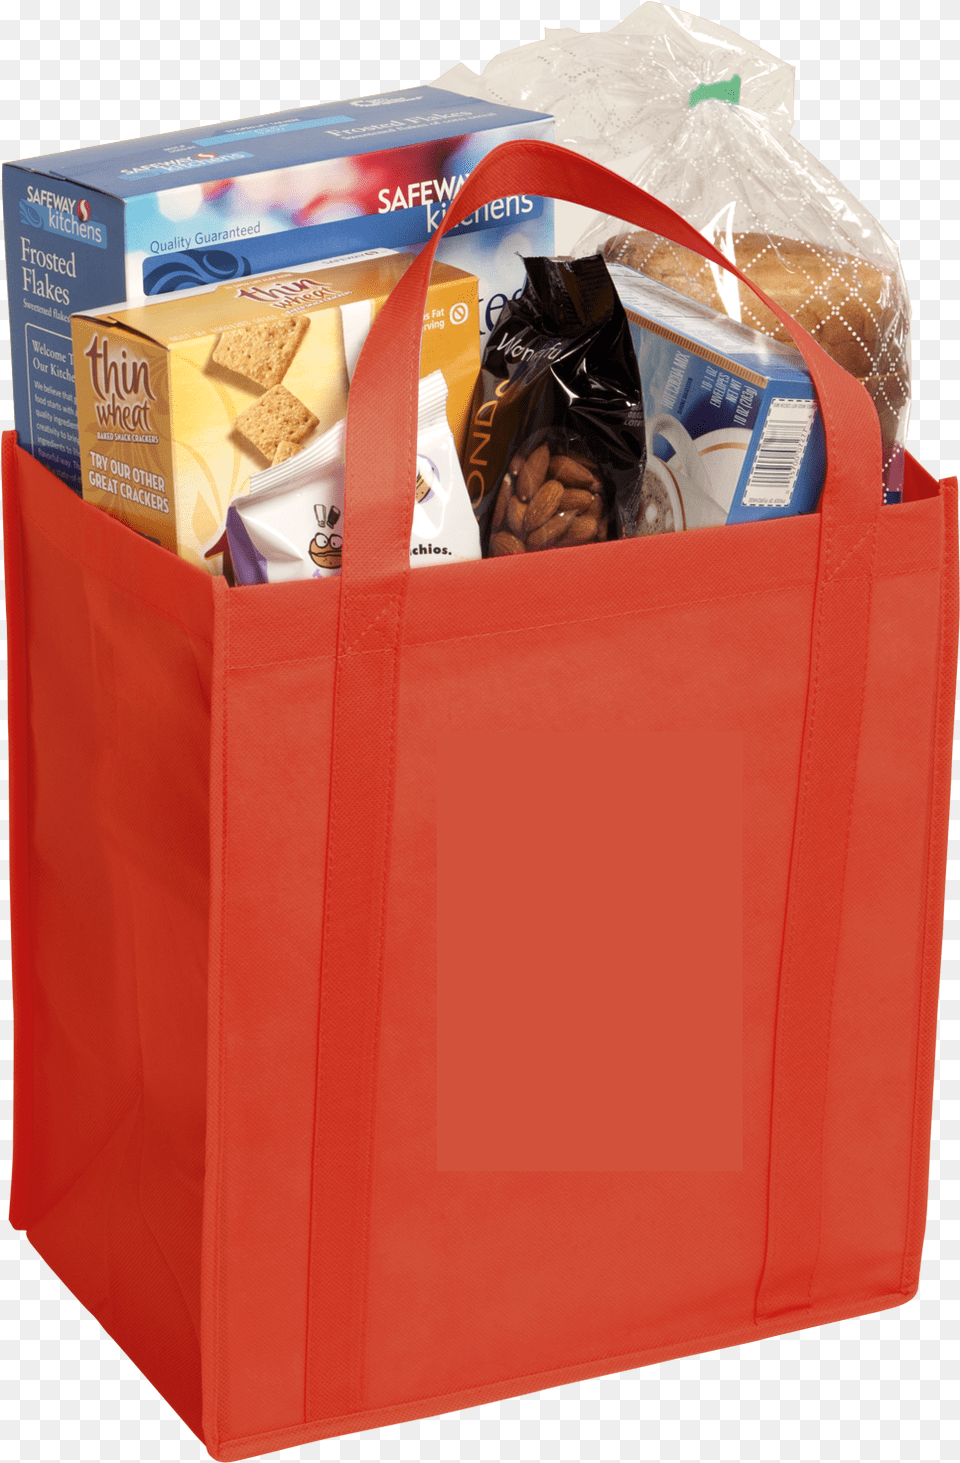 13 Red Grocery Items Bag, Accessories, Handbag, Shopping Bag, Box Free Png Download